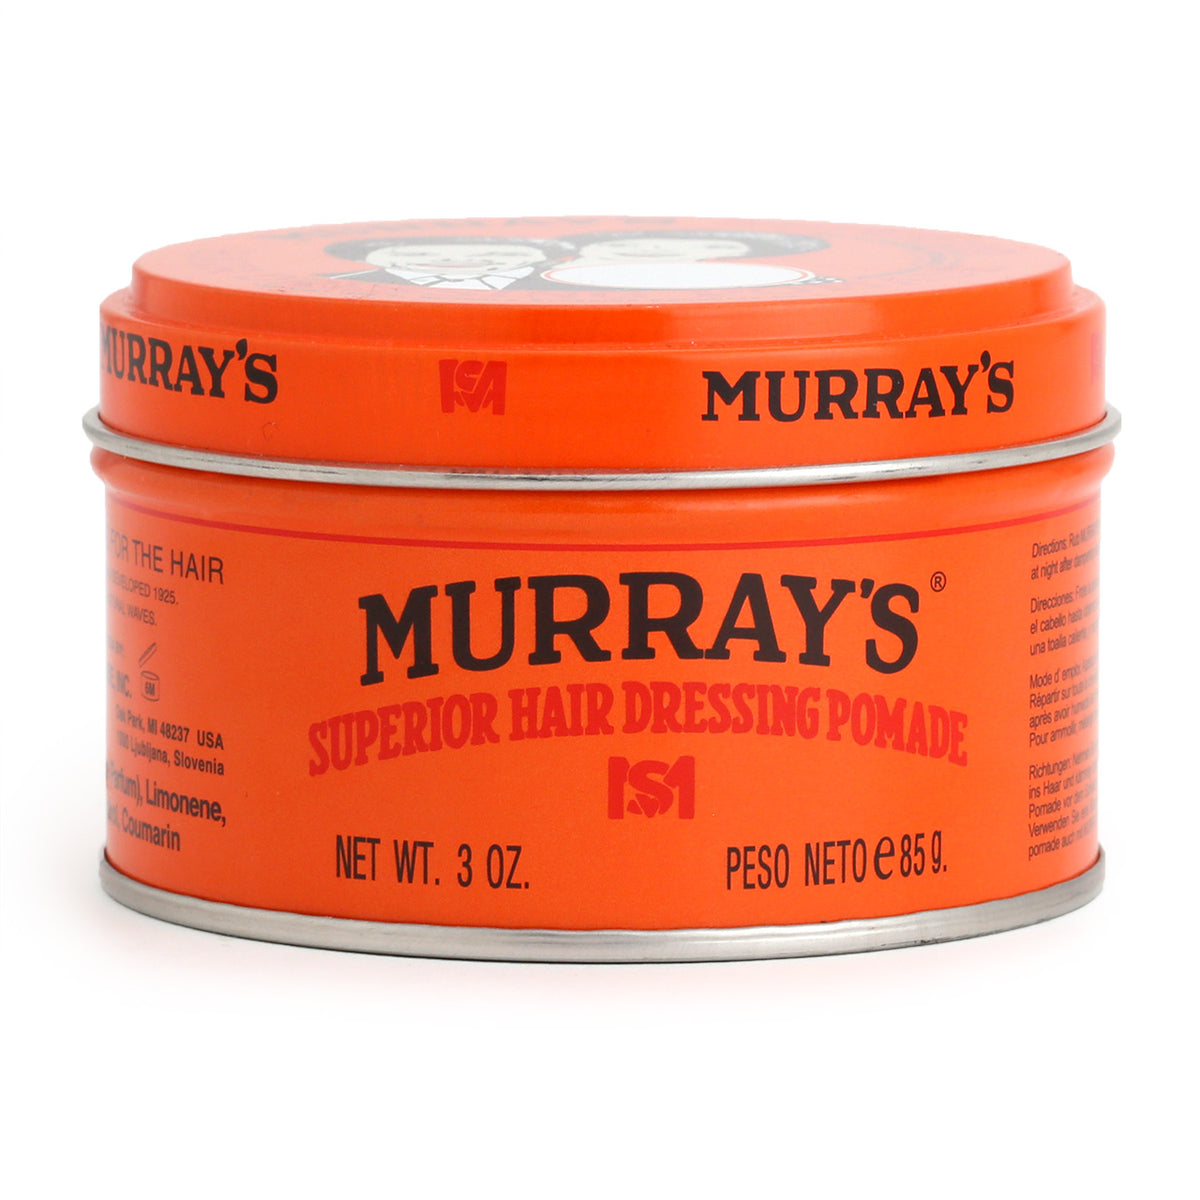 Murrays Superior Hair Dressing Pomade, 85g. Side view